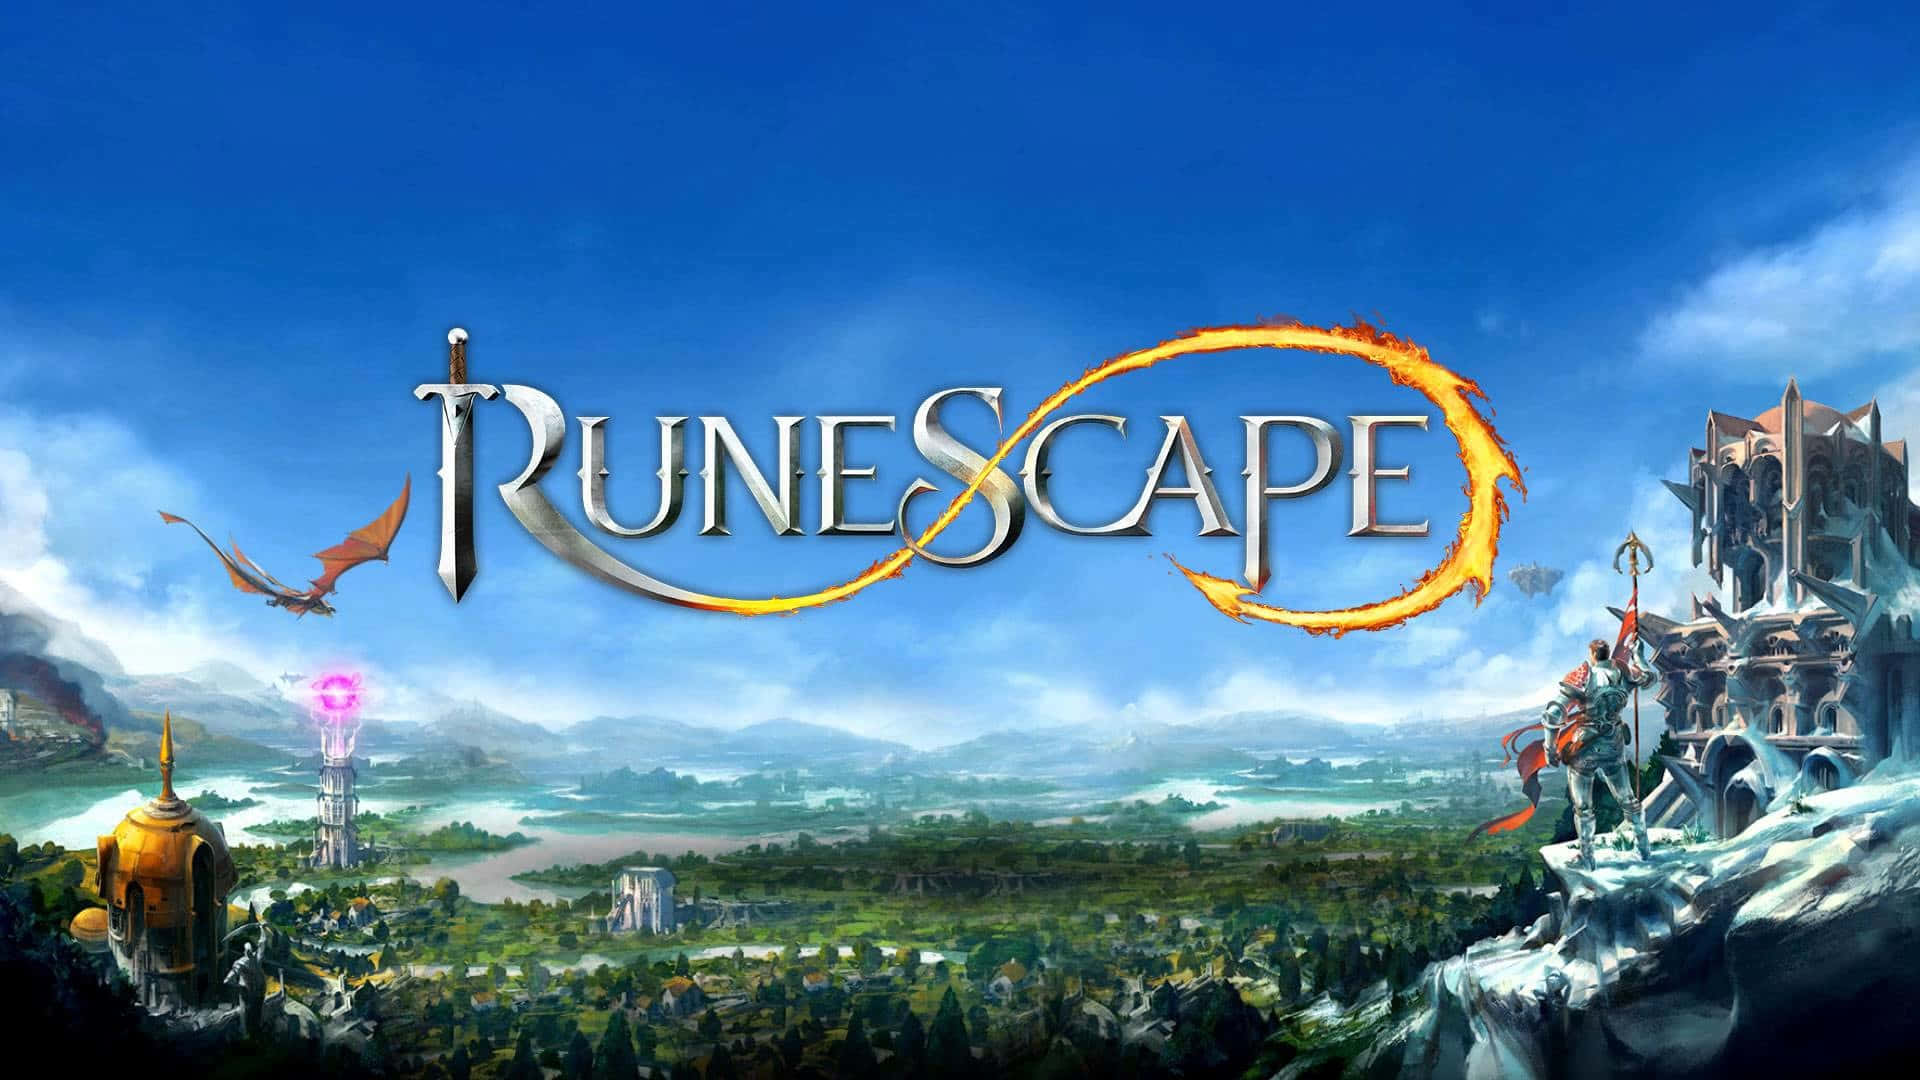 Runescape - A Game With A Castle And Mountains